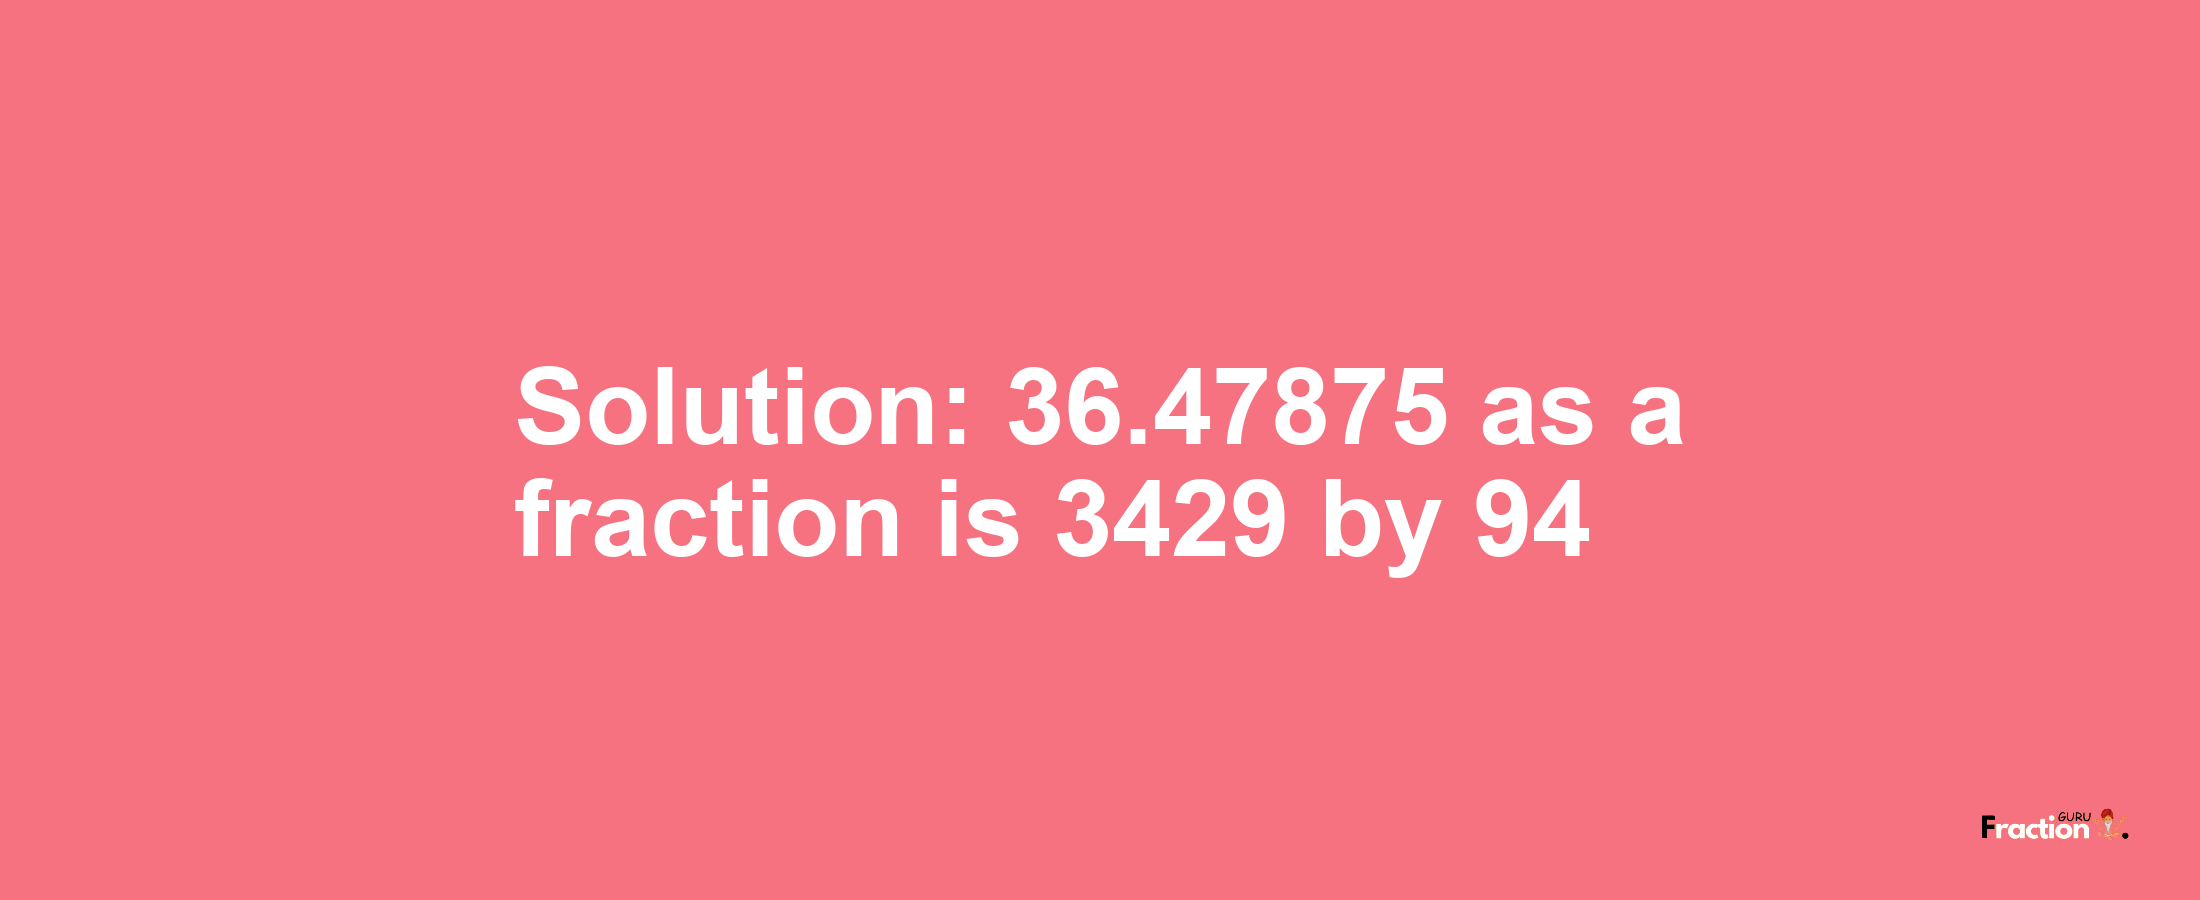 Solution:36.47875 as a fraction is 3429/94